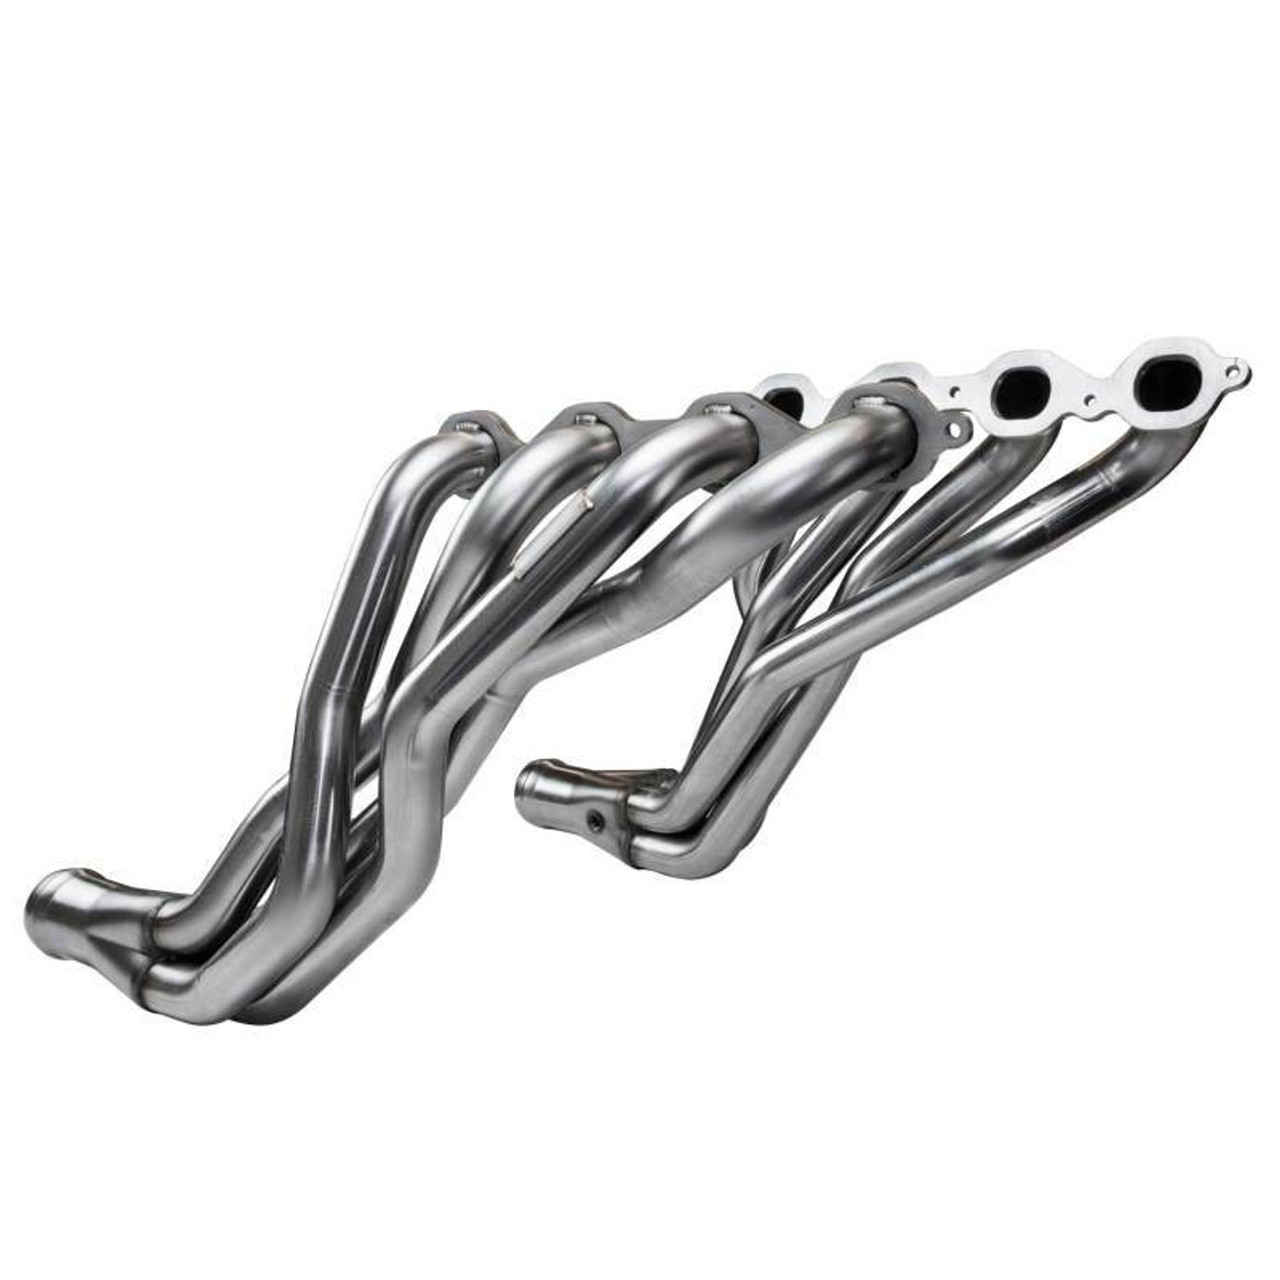 Kooks Headers Kooks 2016 Cadillac CTS-V LT4 6.2L 2in x 3in SS LT Headers w/ Green Catted SS Connection Pipes - 2312H630